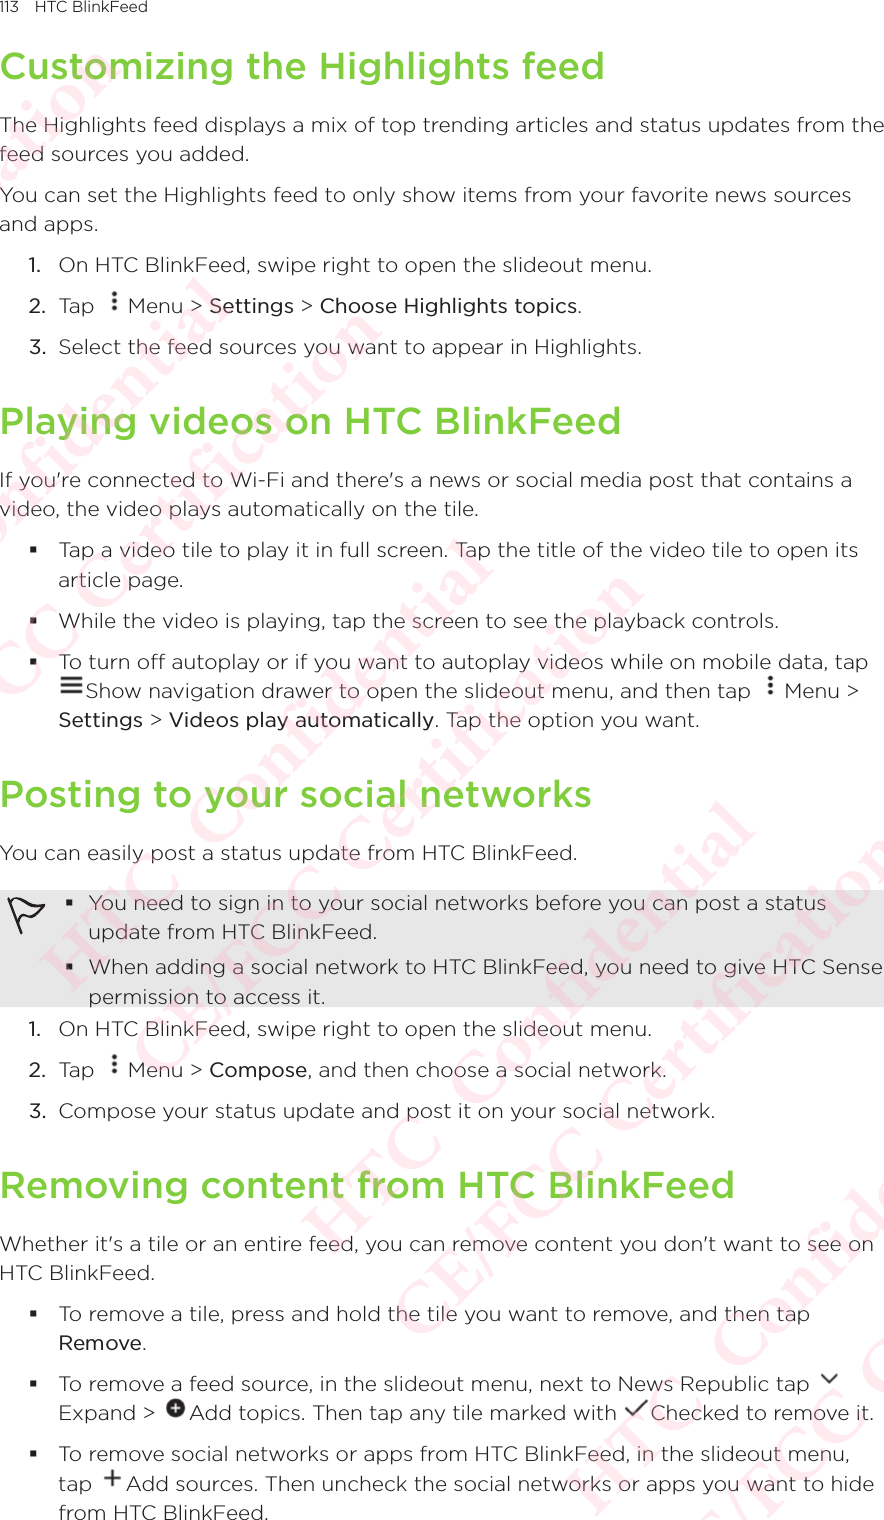 113 HTC BlinkFeedCustomizing the Highlights feedThe Highlights feed displays a mix of top trending articles and status updates from the feed sources you added. You can set the Highlights feed to only show items from your favorite news sources and apps. 1.  On HTC BlinkFeed, swipe right to open the slideout menu. 2.  Tap  Menu &gt; Settings &gt; Choose Highlights topics. 3.  Select the feed sources you want to appear in Highlights. Playing videos on HTC BlinkFeedIf you&apos;re connected to Wi-Fi and there&apos;s a news or social media post that contains a video, the video plays automatically on the tile. Tap a video tile to play it in full screen. Tap the title of the video tile to open its article page.  While the video is playing, tap the screen to see the playback controls. To turn off autoplay or if you want to autoplay videos while on mobile data, tap To turn off autoplay or if you want to autoplay videos while on mobile data, tap Show navigation drawer to open the slideout menu, and then tap To turn off autoplay or if you want to autoplay videos while on mobile data, tap Menu &gt; Settings &gt; Videos play automatically. Tap the option you want.Posting to your social networksYou can easily post a status update from HTC BlinkFeed.  You need to sign in to your social networks before you can post a status update from HTC BlinkFeed. When adding a social network to HTC BlinkFeed, you need to give HTC Sense permission to access it. 1.  On HTC BlinkFeed, swipe right to open the slideout menu. 2.  Tap  Menu &gt; Compose, and then choose a social network. 3.  Compose your status update and post it on your social network. Removing content from HTC BlinkFeedWhether it&apos;s a tile or an entire feed, you can remove content you don&apos;t want to see on HTC BlinkFeed.  To remove a tile, press and hold the tile you want to remove, and then tap Remove.  To remove a feed source, in the slideout menu, next to News Republic tap Expand &gt; To remove a feed source, in the slideout menu, next to News Republic tap Add topics. Then tap any tile marked with To remove a feed source, in the slideout menu, next to News Republic tap Checked to remove it.  To remove social networks or apps from HTC BlinkFeed, in the slideout menu, tap To remove social networks or apps from HTC BlinkFeed, in the slideout menu, Add sources. Then uncheck the social networks or apps you want to hide from HTC BlinkFeed. HTC  Confidential CE/FCC Certification  HTC  Confidential CE/FCC Certification  HTC  Confidential CE/FCC Certification  HTC  Confidential CE/FCC Certification  HTC  Confidential CE/FCC Certification 